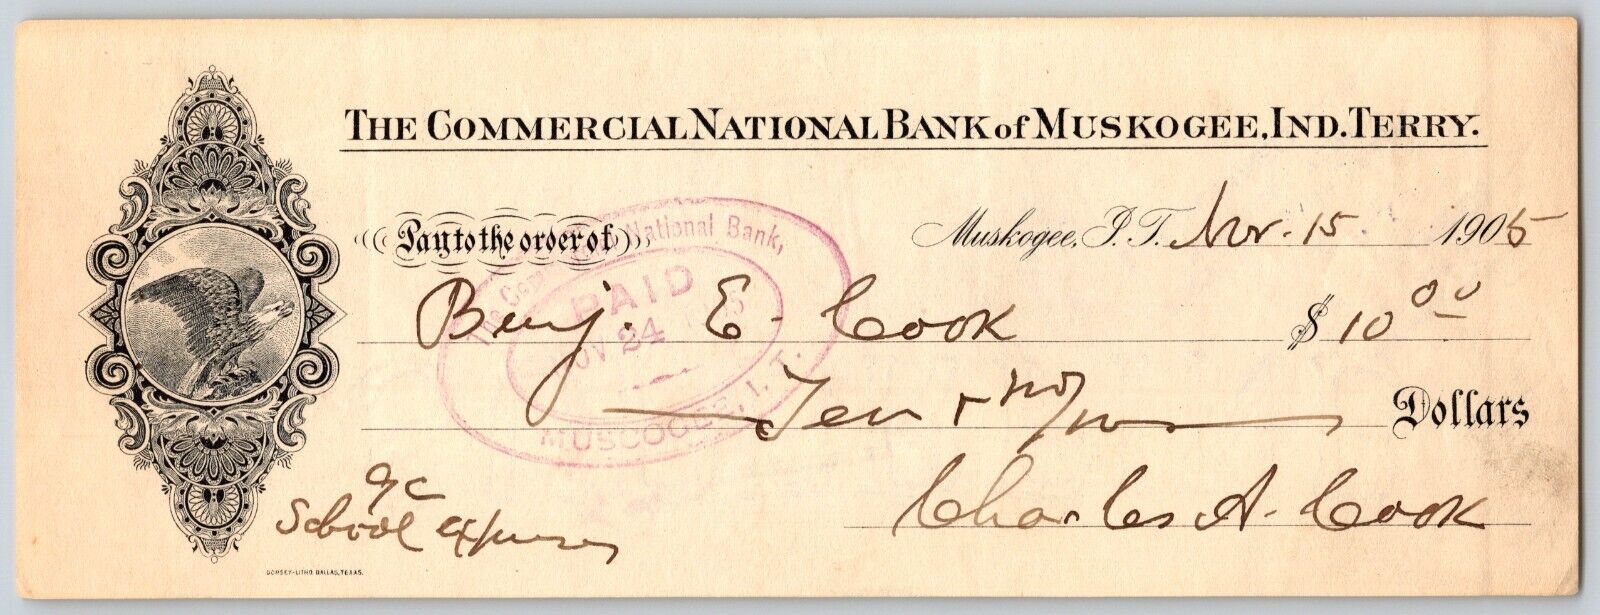 Muskogee, OK 1905 Indian Territory $10 Commercial National Bank Check - Scarce